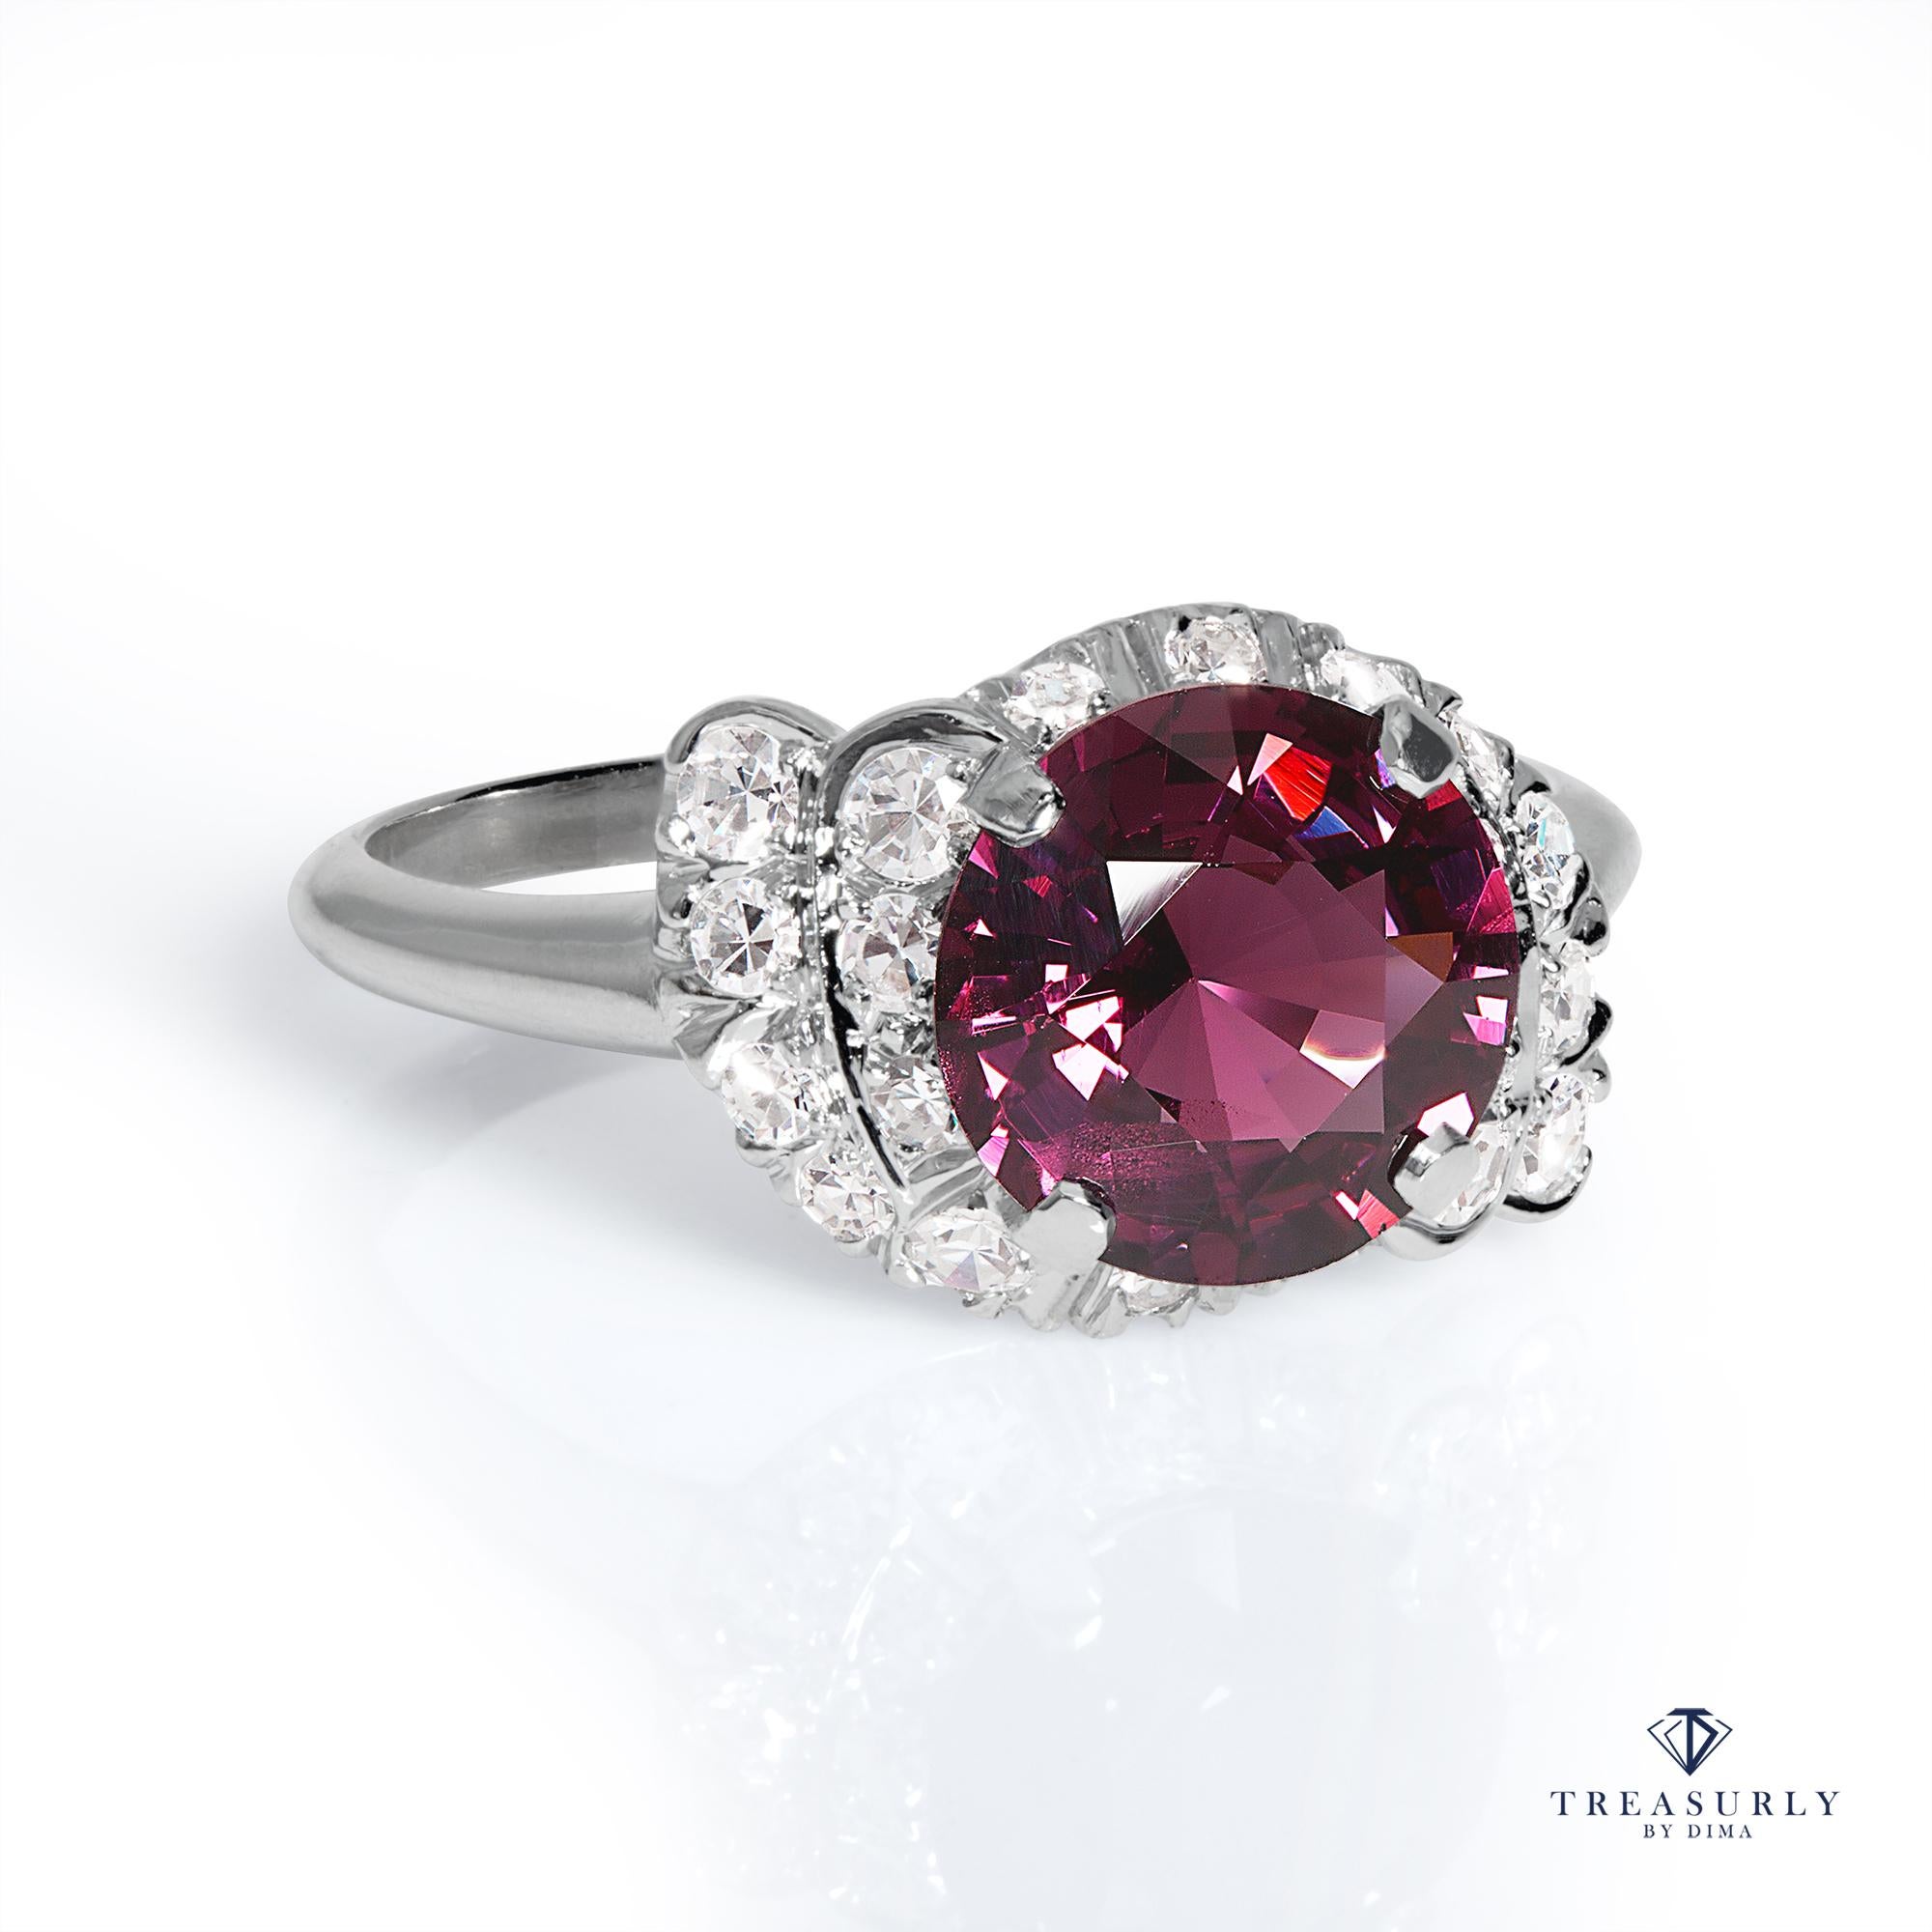 1950s Vintage Natural 3.50ct No-Heat Round Purple SPINEL Diamond Platinum Ring, GIA.

A SUPER fine Estate Ring features a Gorgeous gem : 2.94ct carat Natural Unheated 